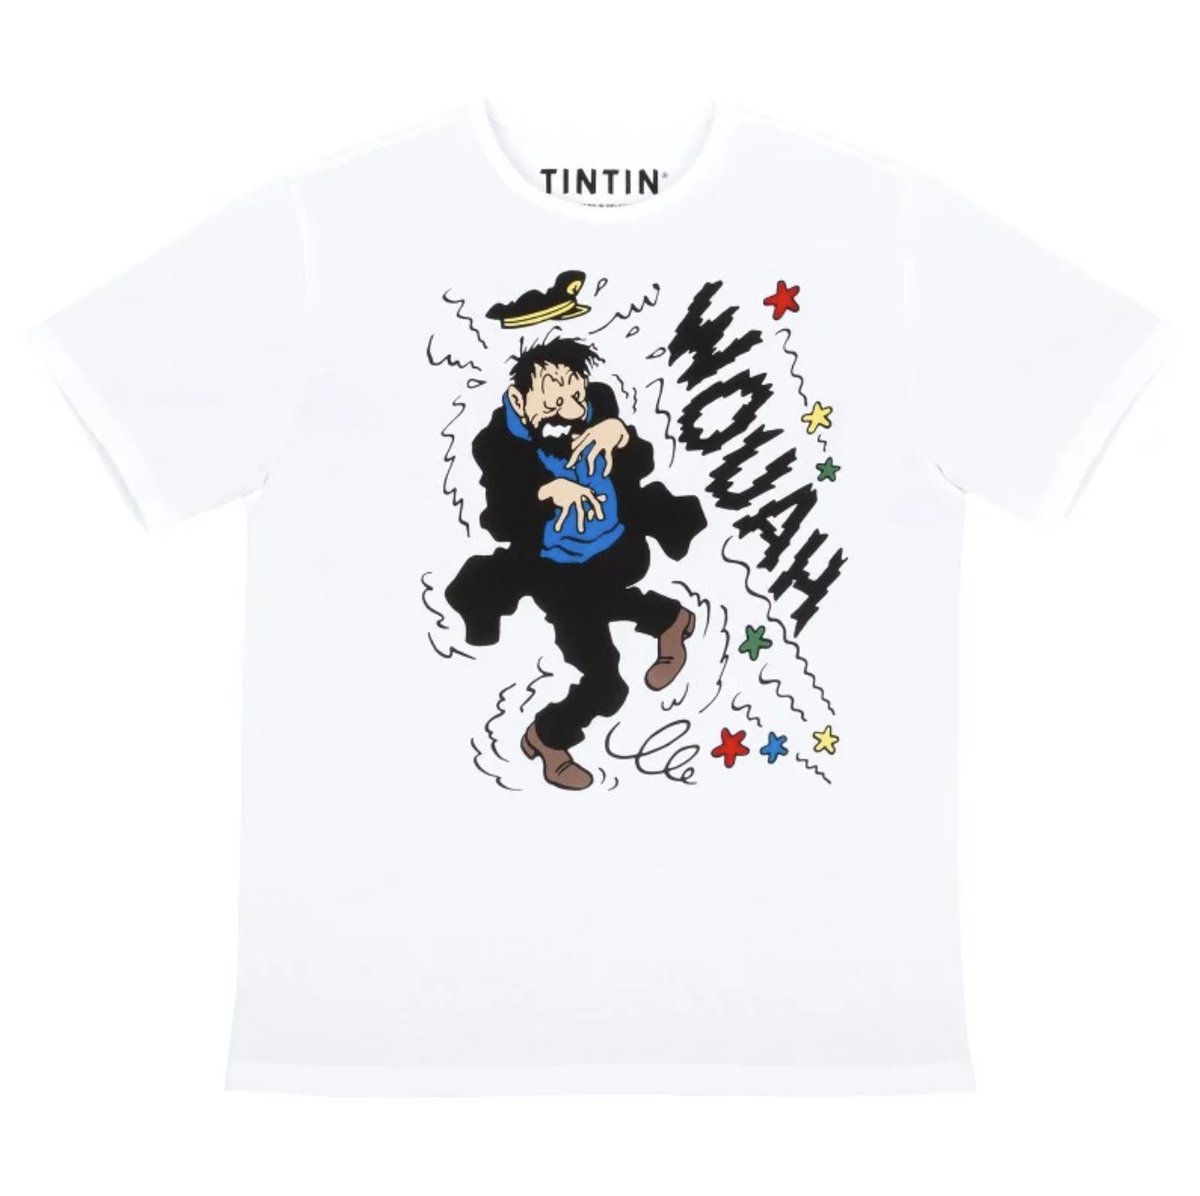 Wouah there! Find endless adventure in the the Captain Haddock 'Wouah' Unisex Tee 👕💙   ➡️  bit.ly/3QNGbfL

#tintinfan #tintinfans #tintin #sausalitoferry #comicbooks #hergé #tintinapparel #tintinshop #tintinsale #sausalitoca #sausalito #california #captainhaddock